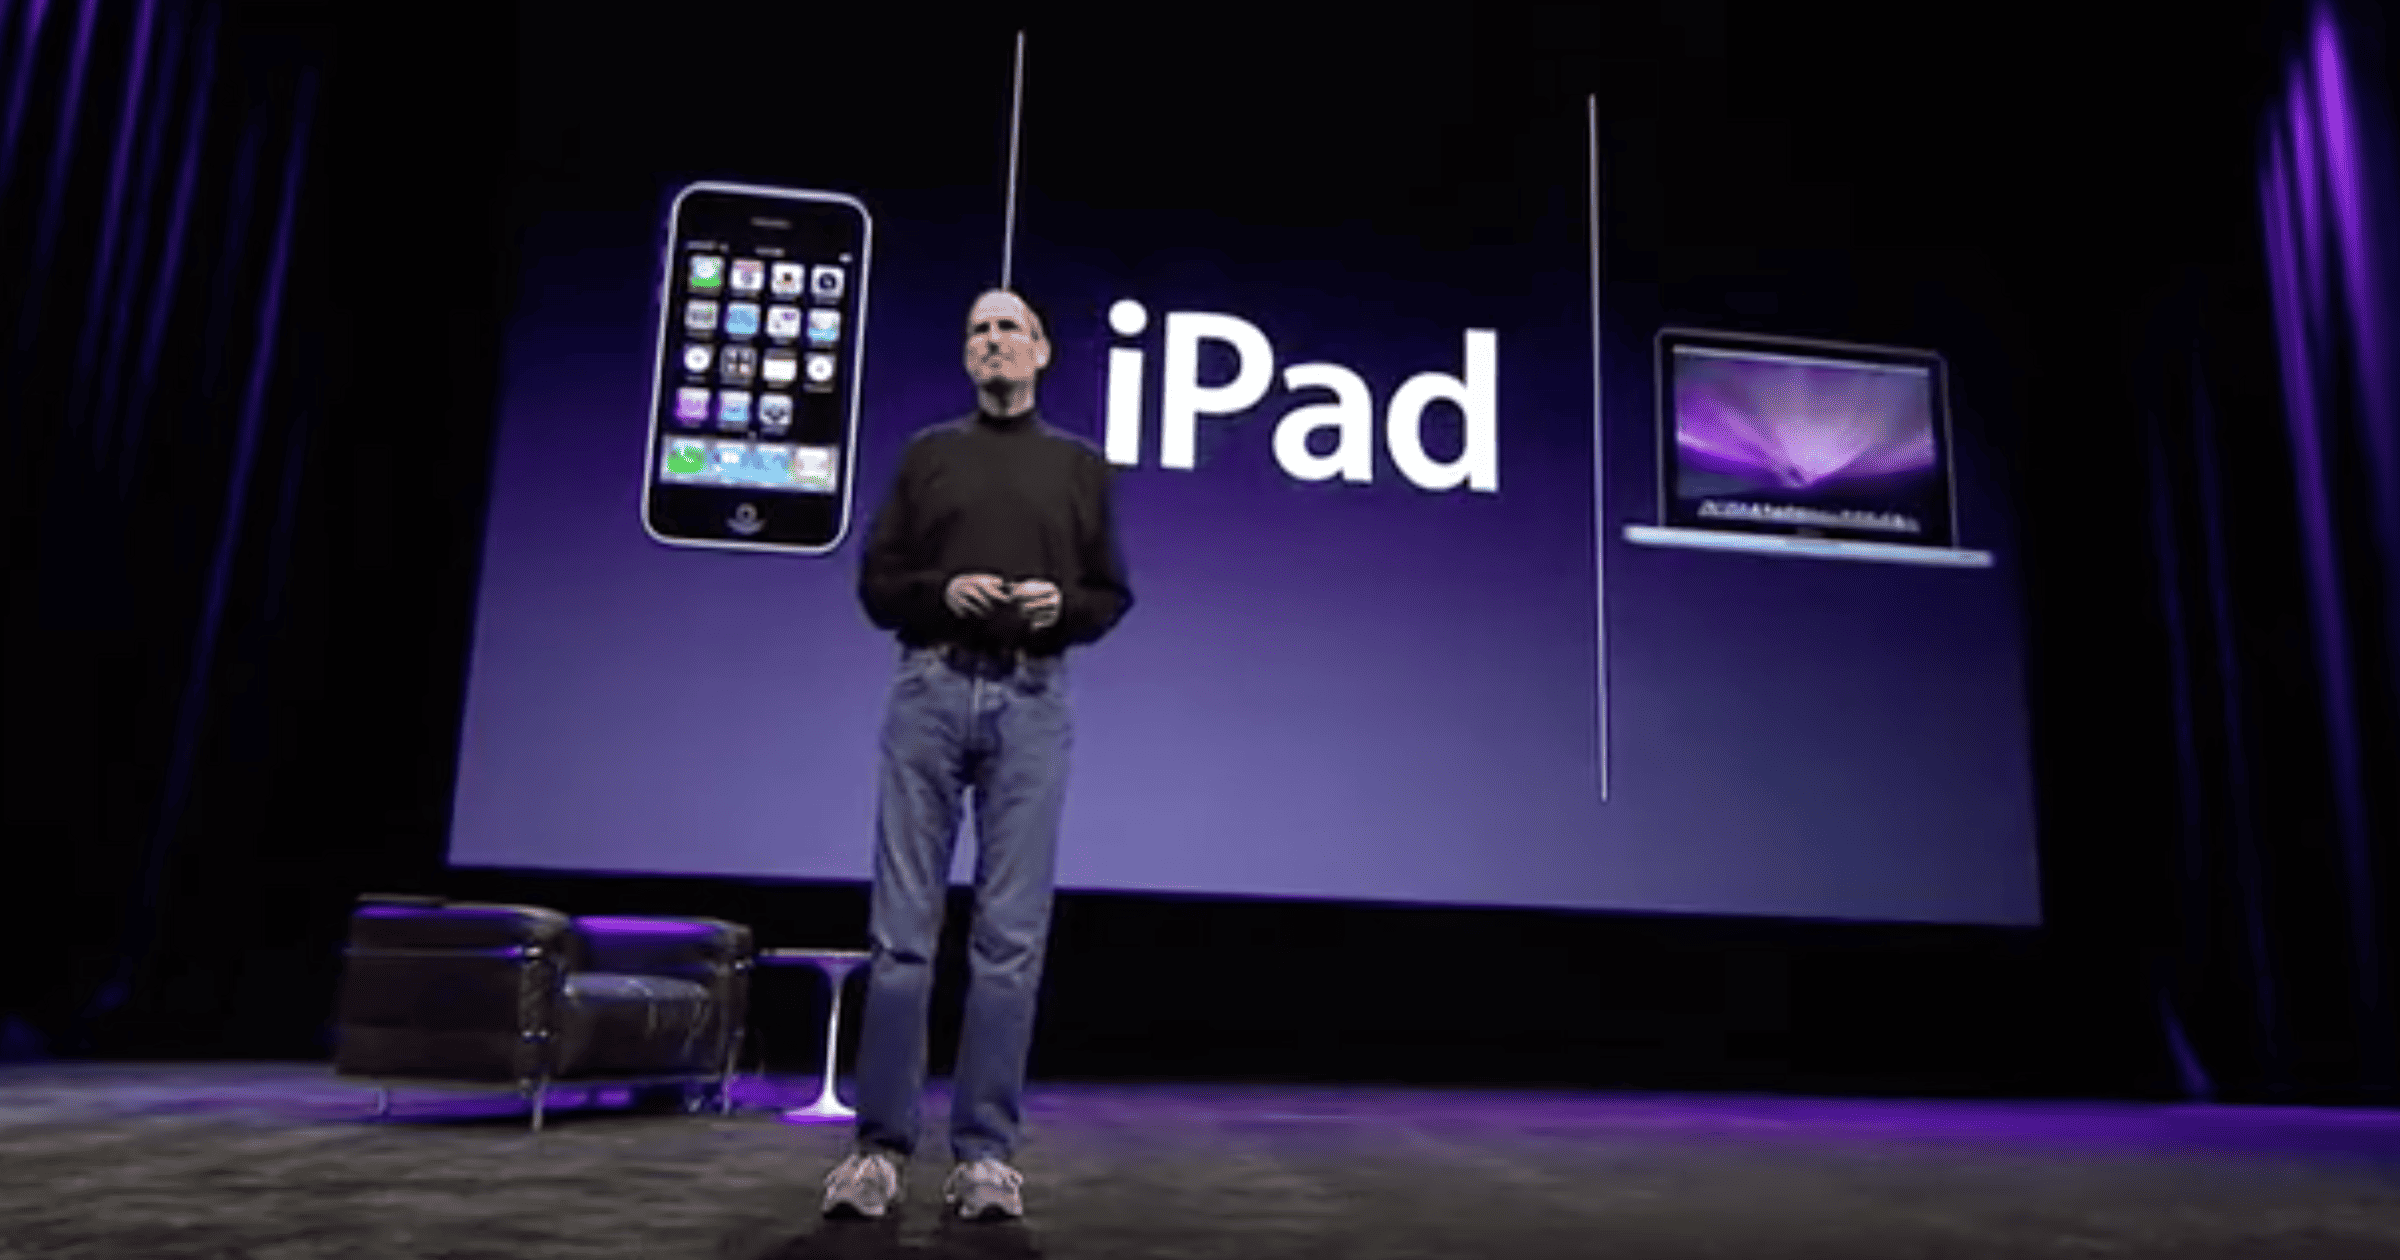 iPad First Launched 27 Janauary 27, 2010 – 12 Year’s Old Today